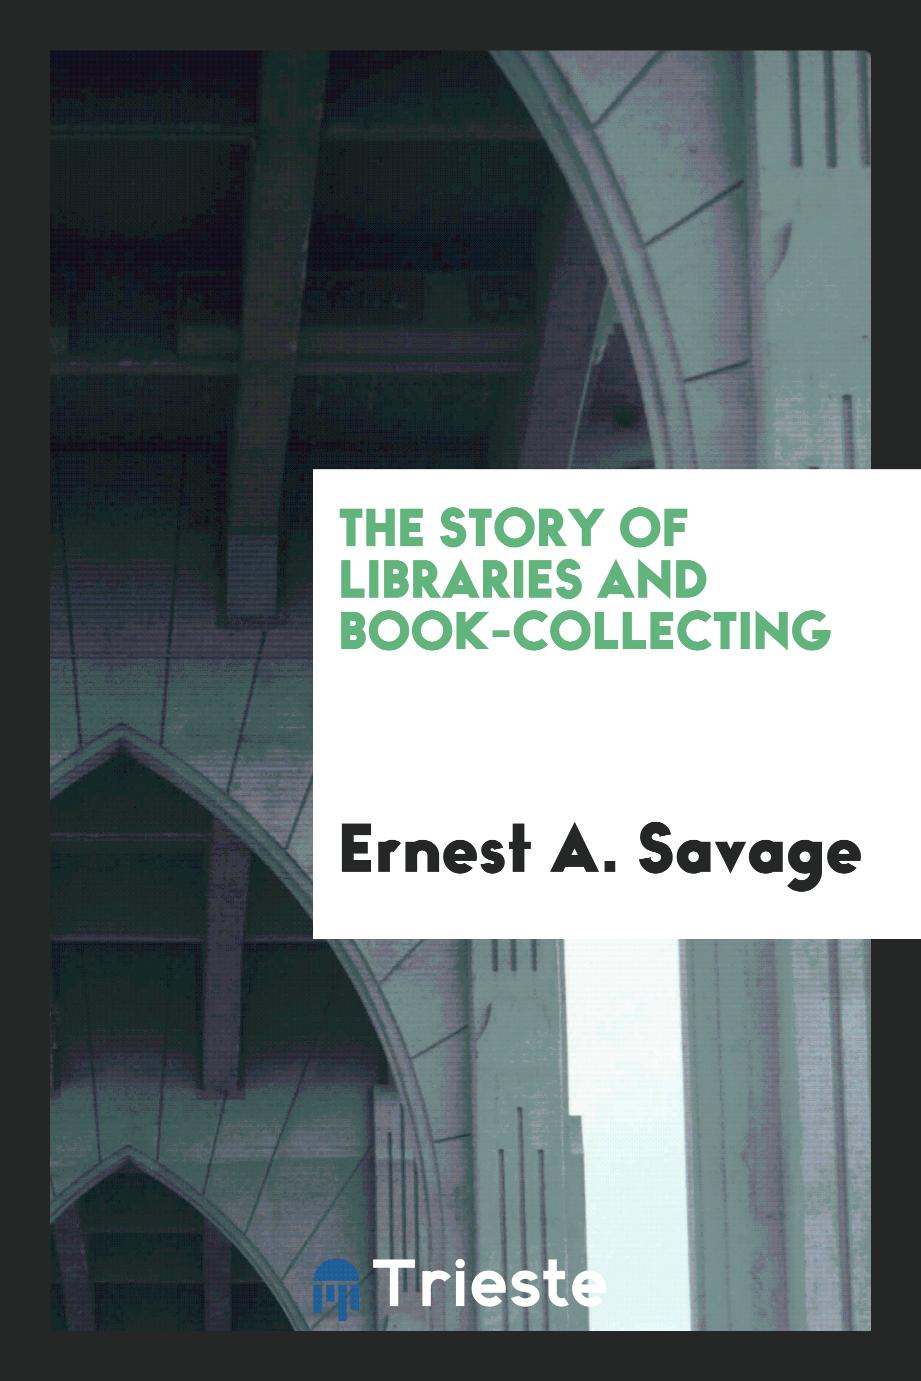 The story of libraries and book-collecting